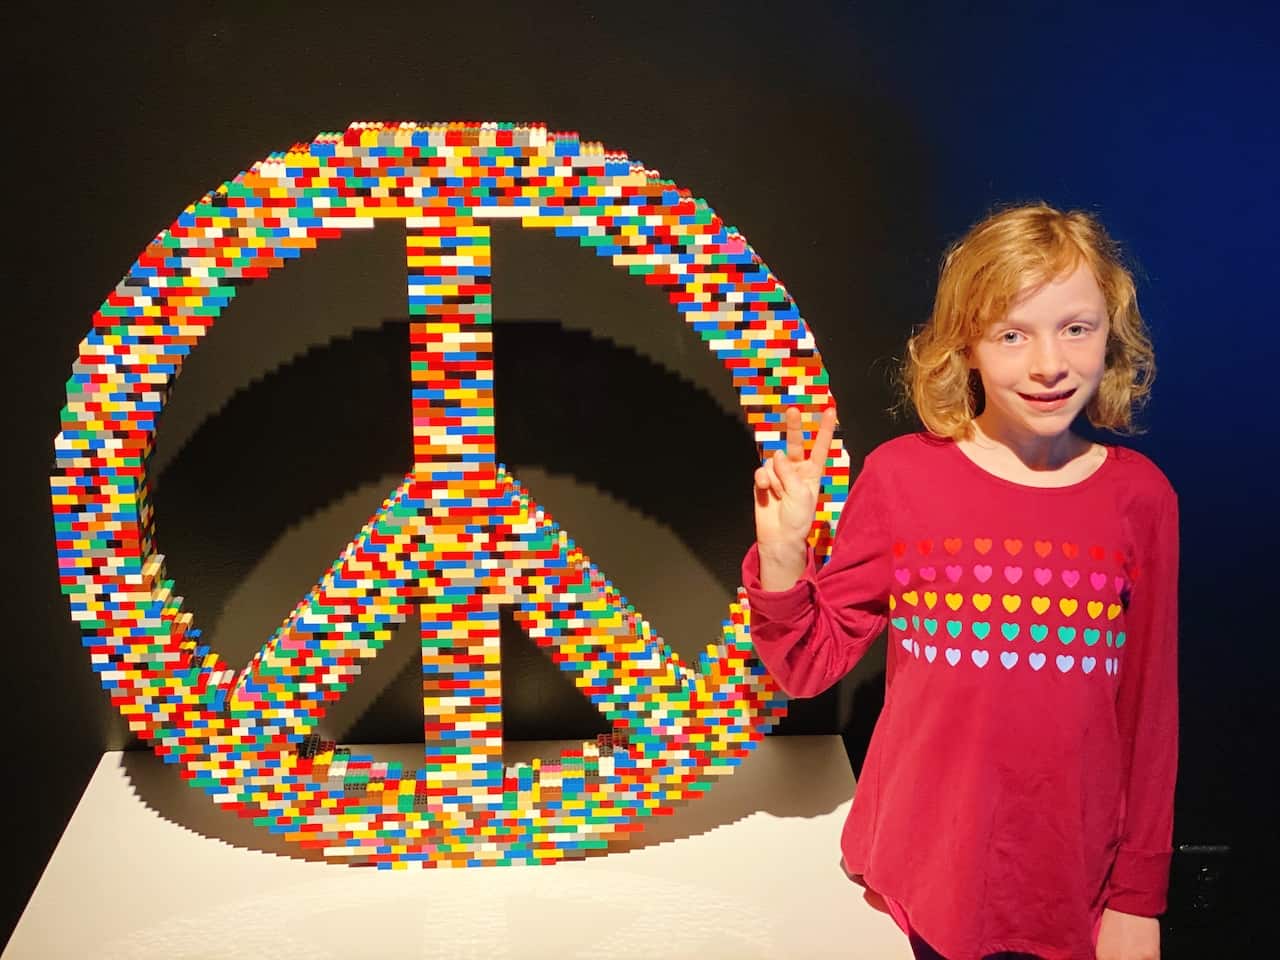 The Art of The Brick at the California Science Center